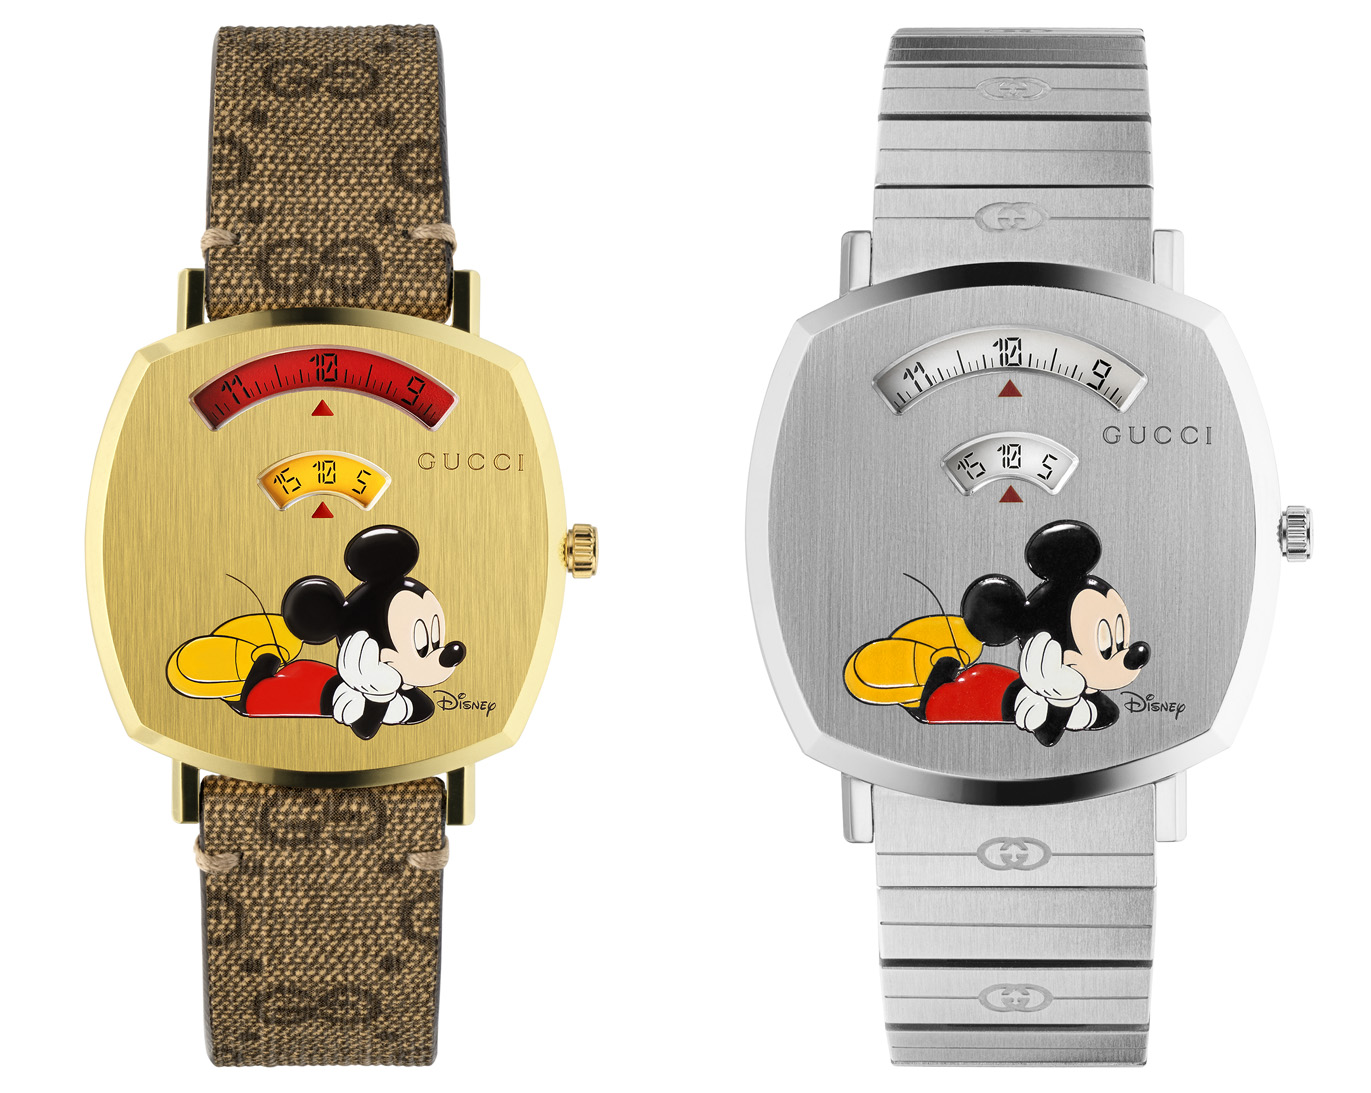 Gucci grip mickey mouse